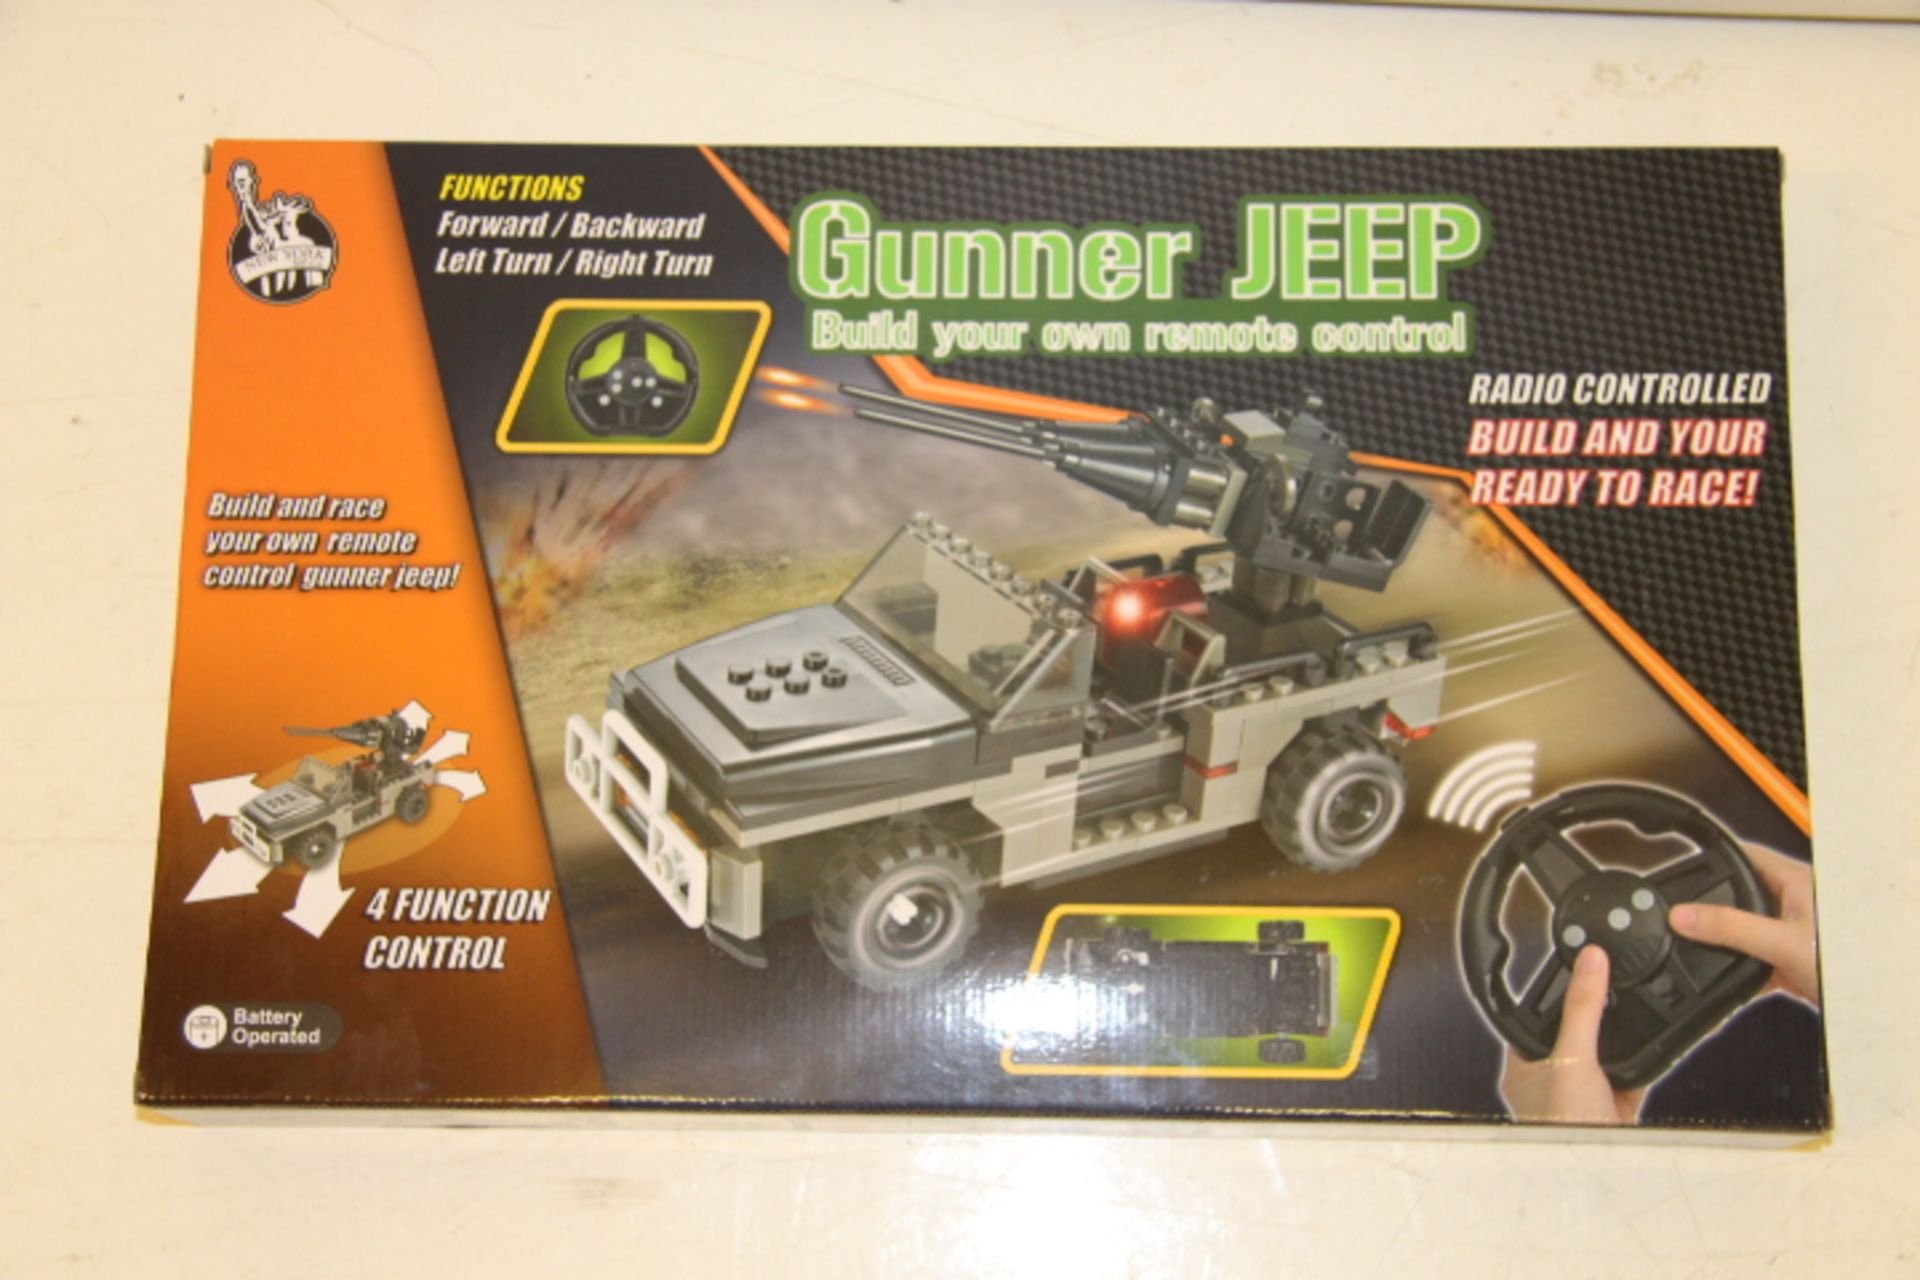 V Build it yourself radio controlled Gunner Jeep lego compatible - Image 3 of 3